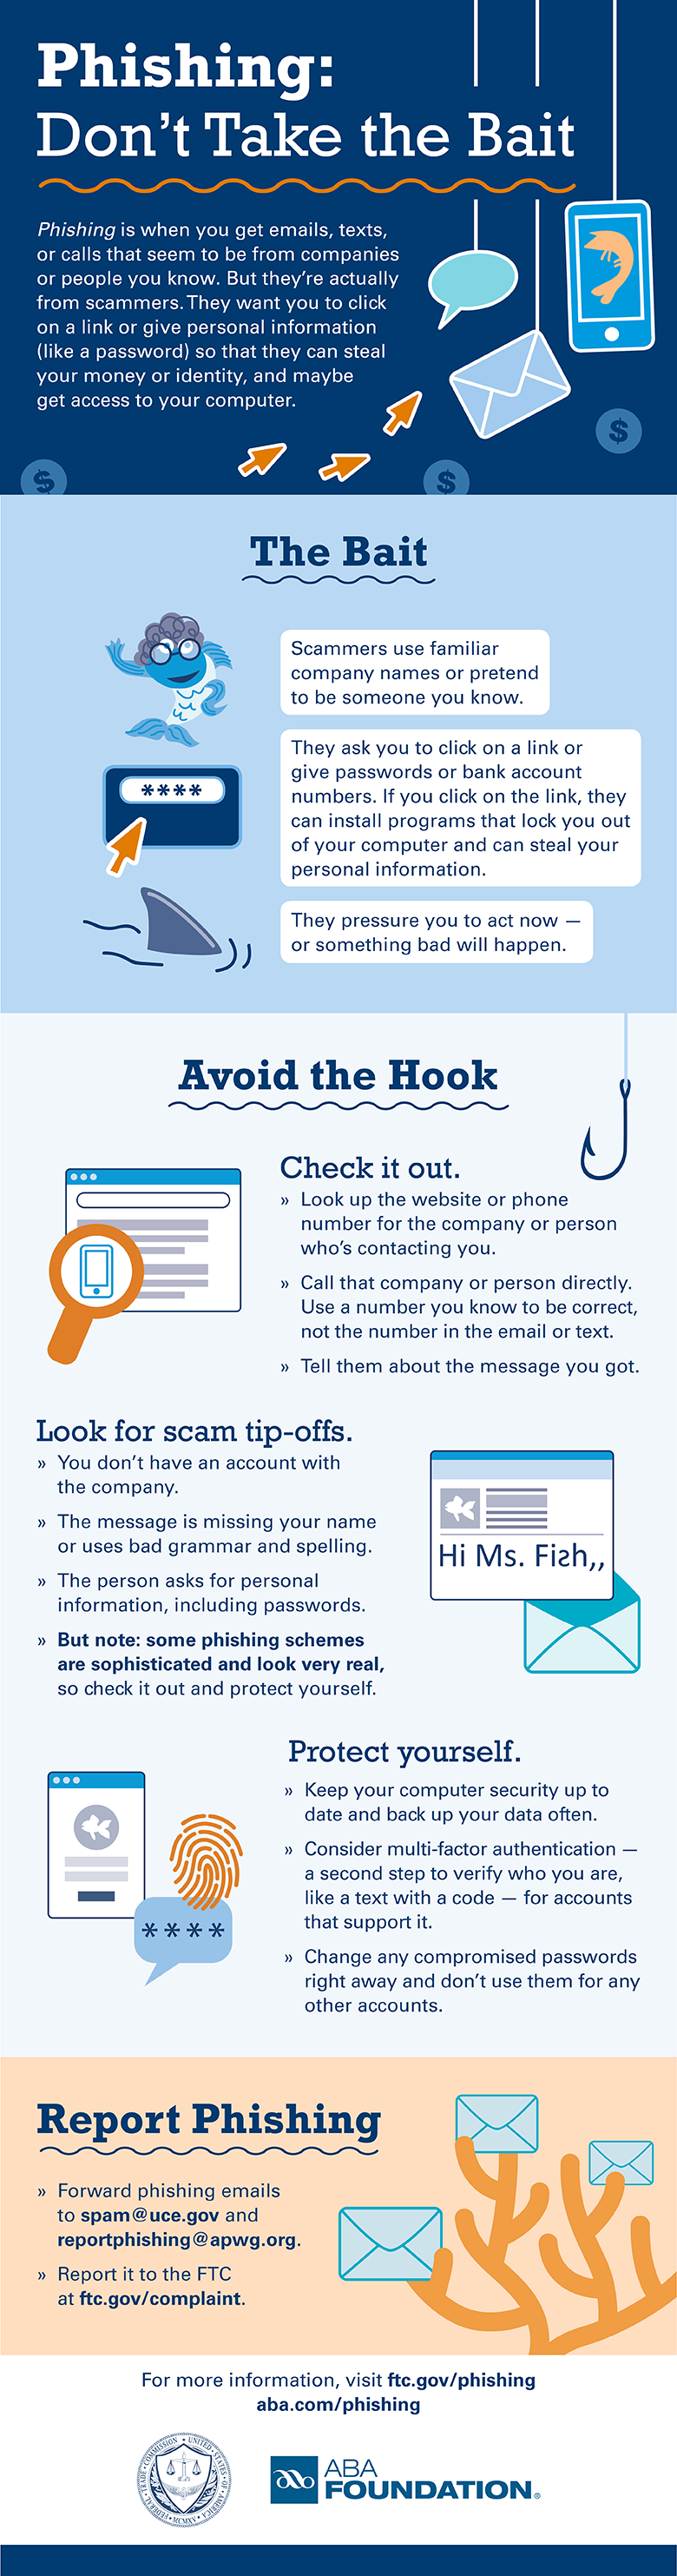 Prevent phishing: Follow these tips and prevent scammers from getting your personal info from texts, calls, or emails to steal your money or identity.